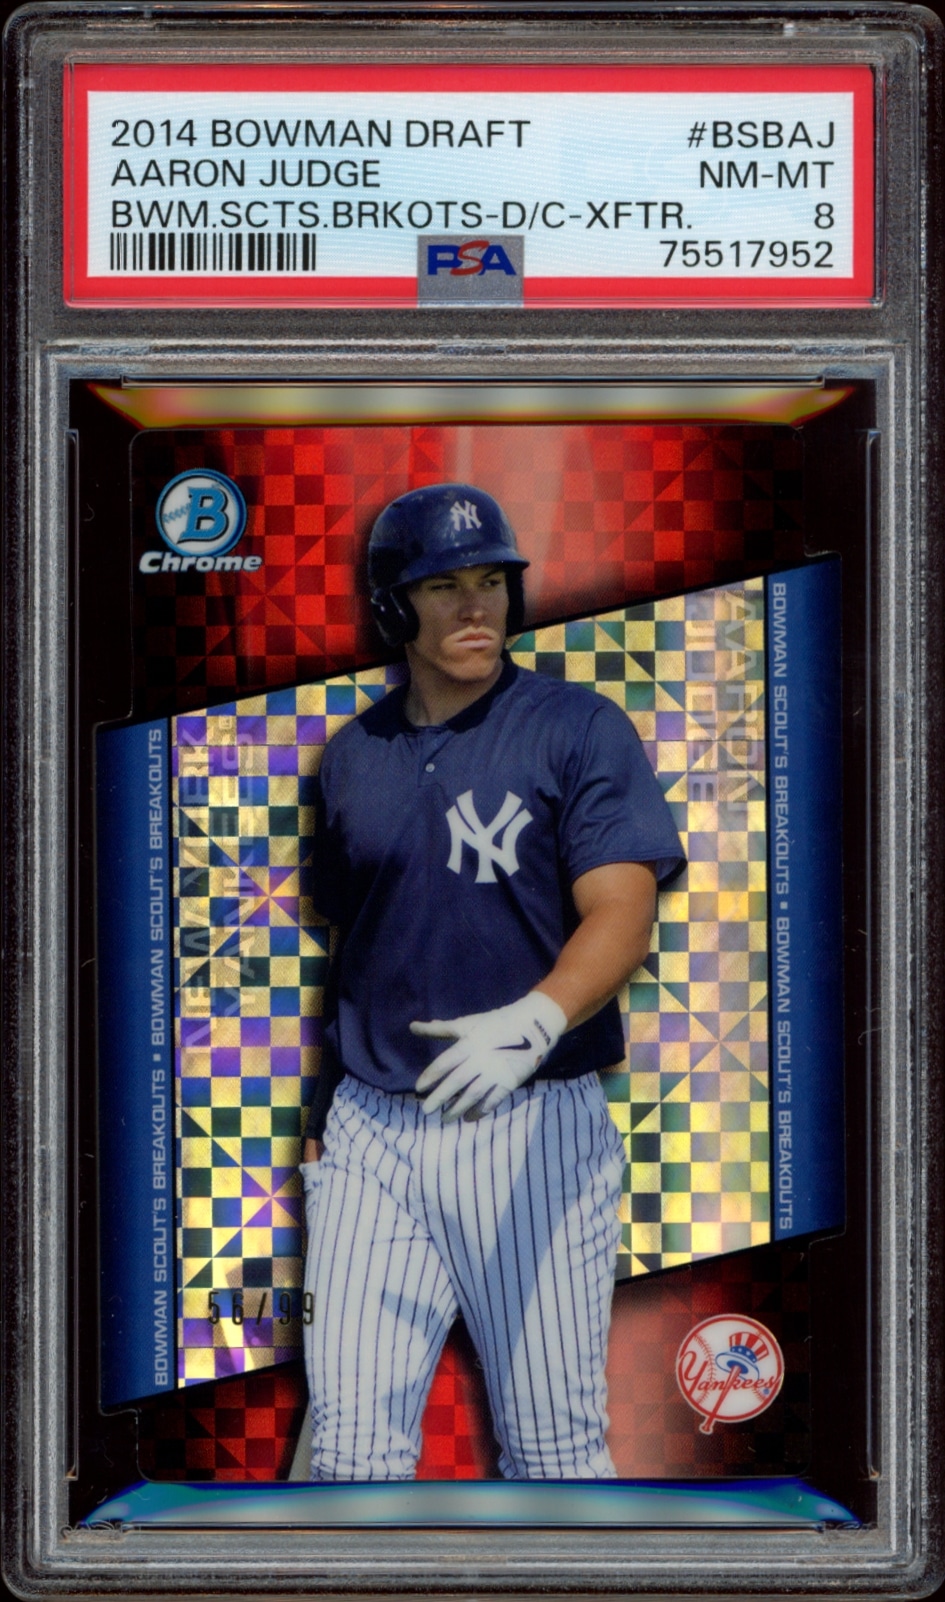 2014 Bowman Chrome Aaron Judge in Yankees uniform, rated NM-MT 8 by Beckett Grading Services.